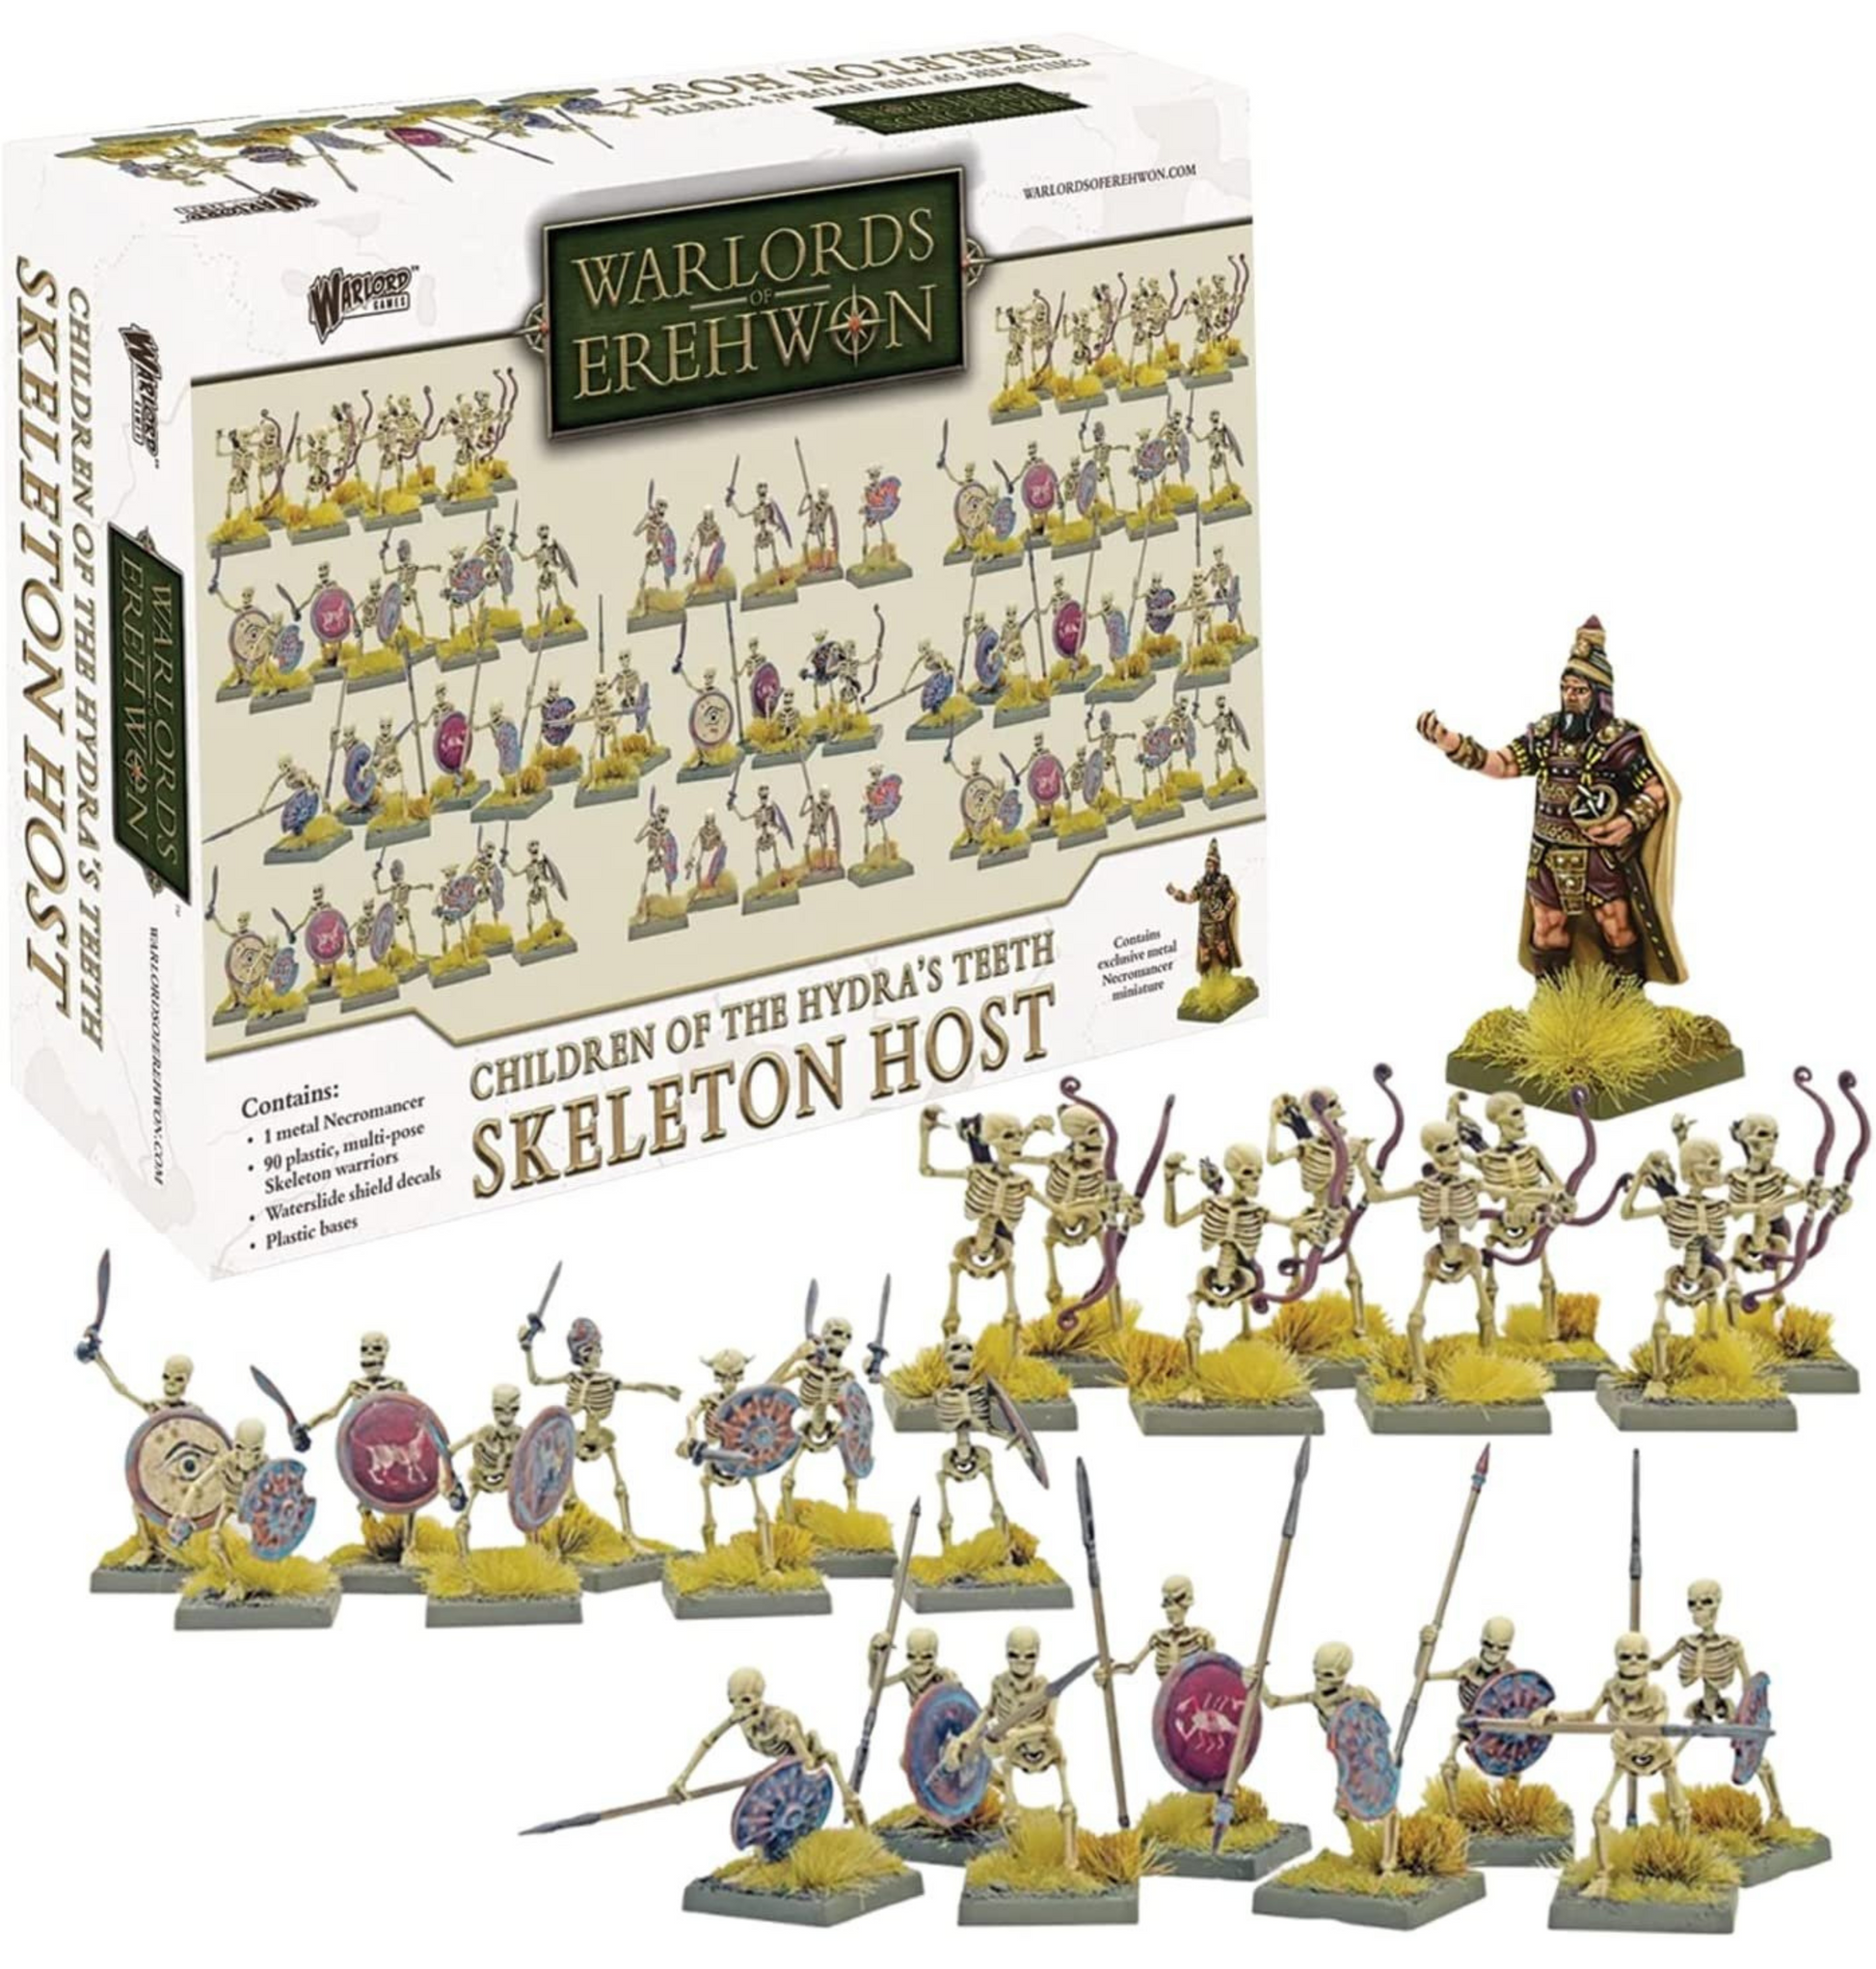 Warlords of Erehwon: Children of The Hydra's Teeth: Skeleton Host